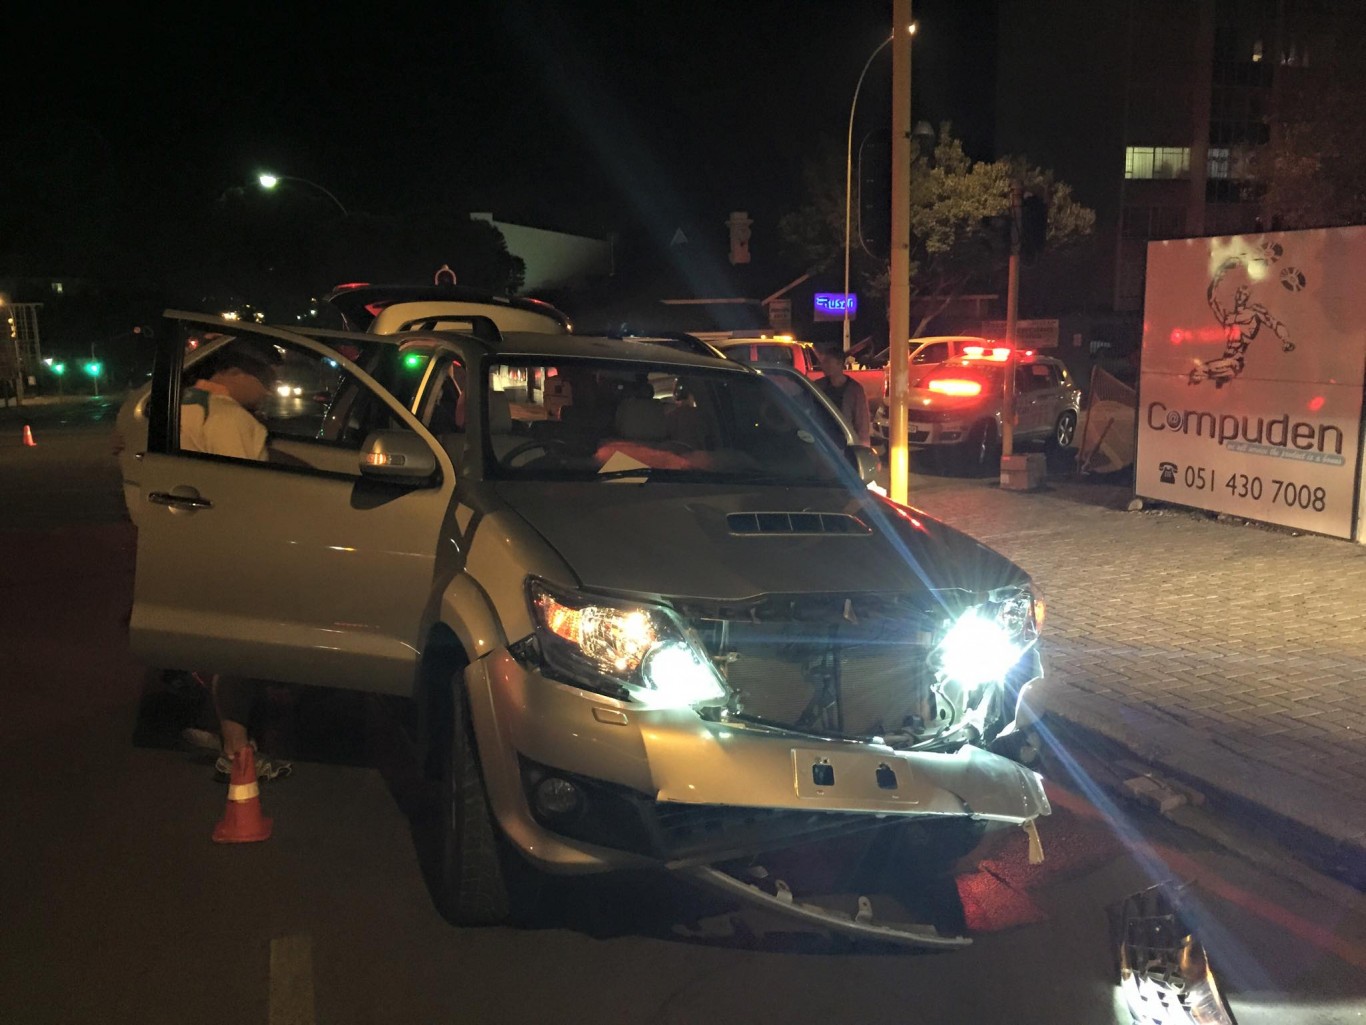 Child and baby injured in collision at intersection in Bloemfontein